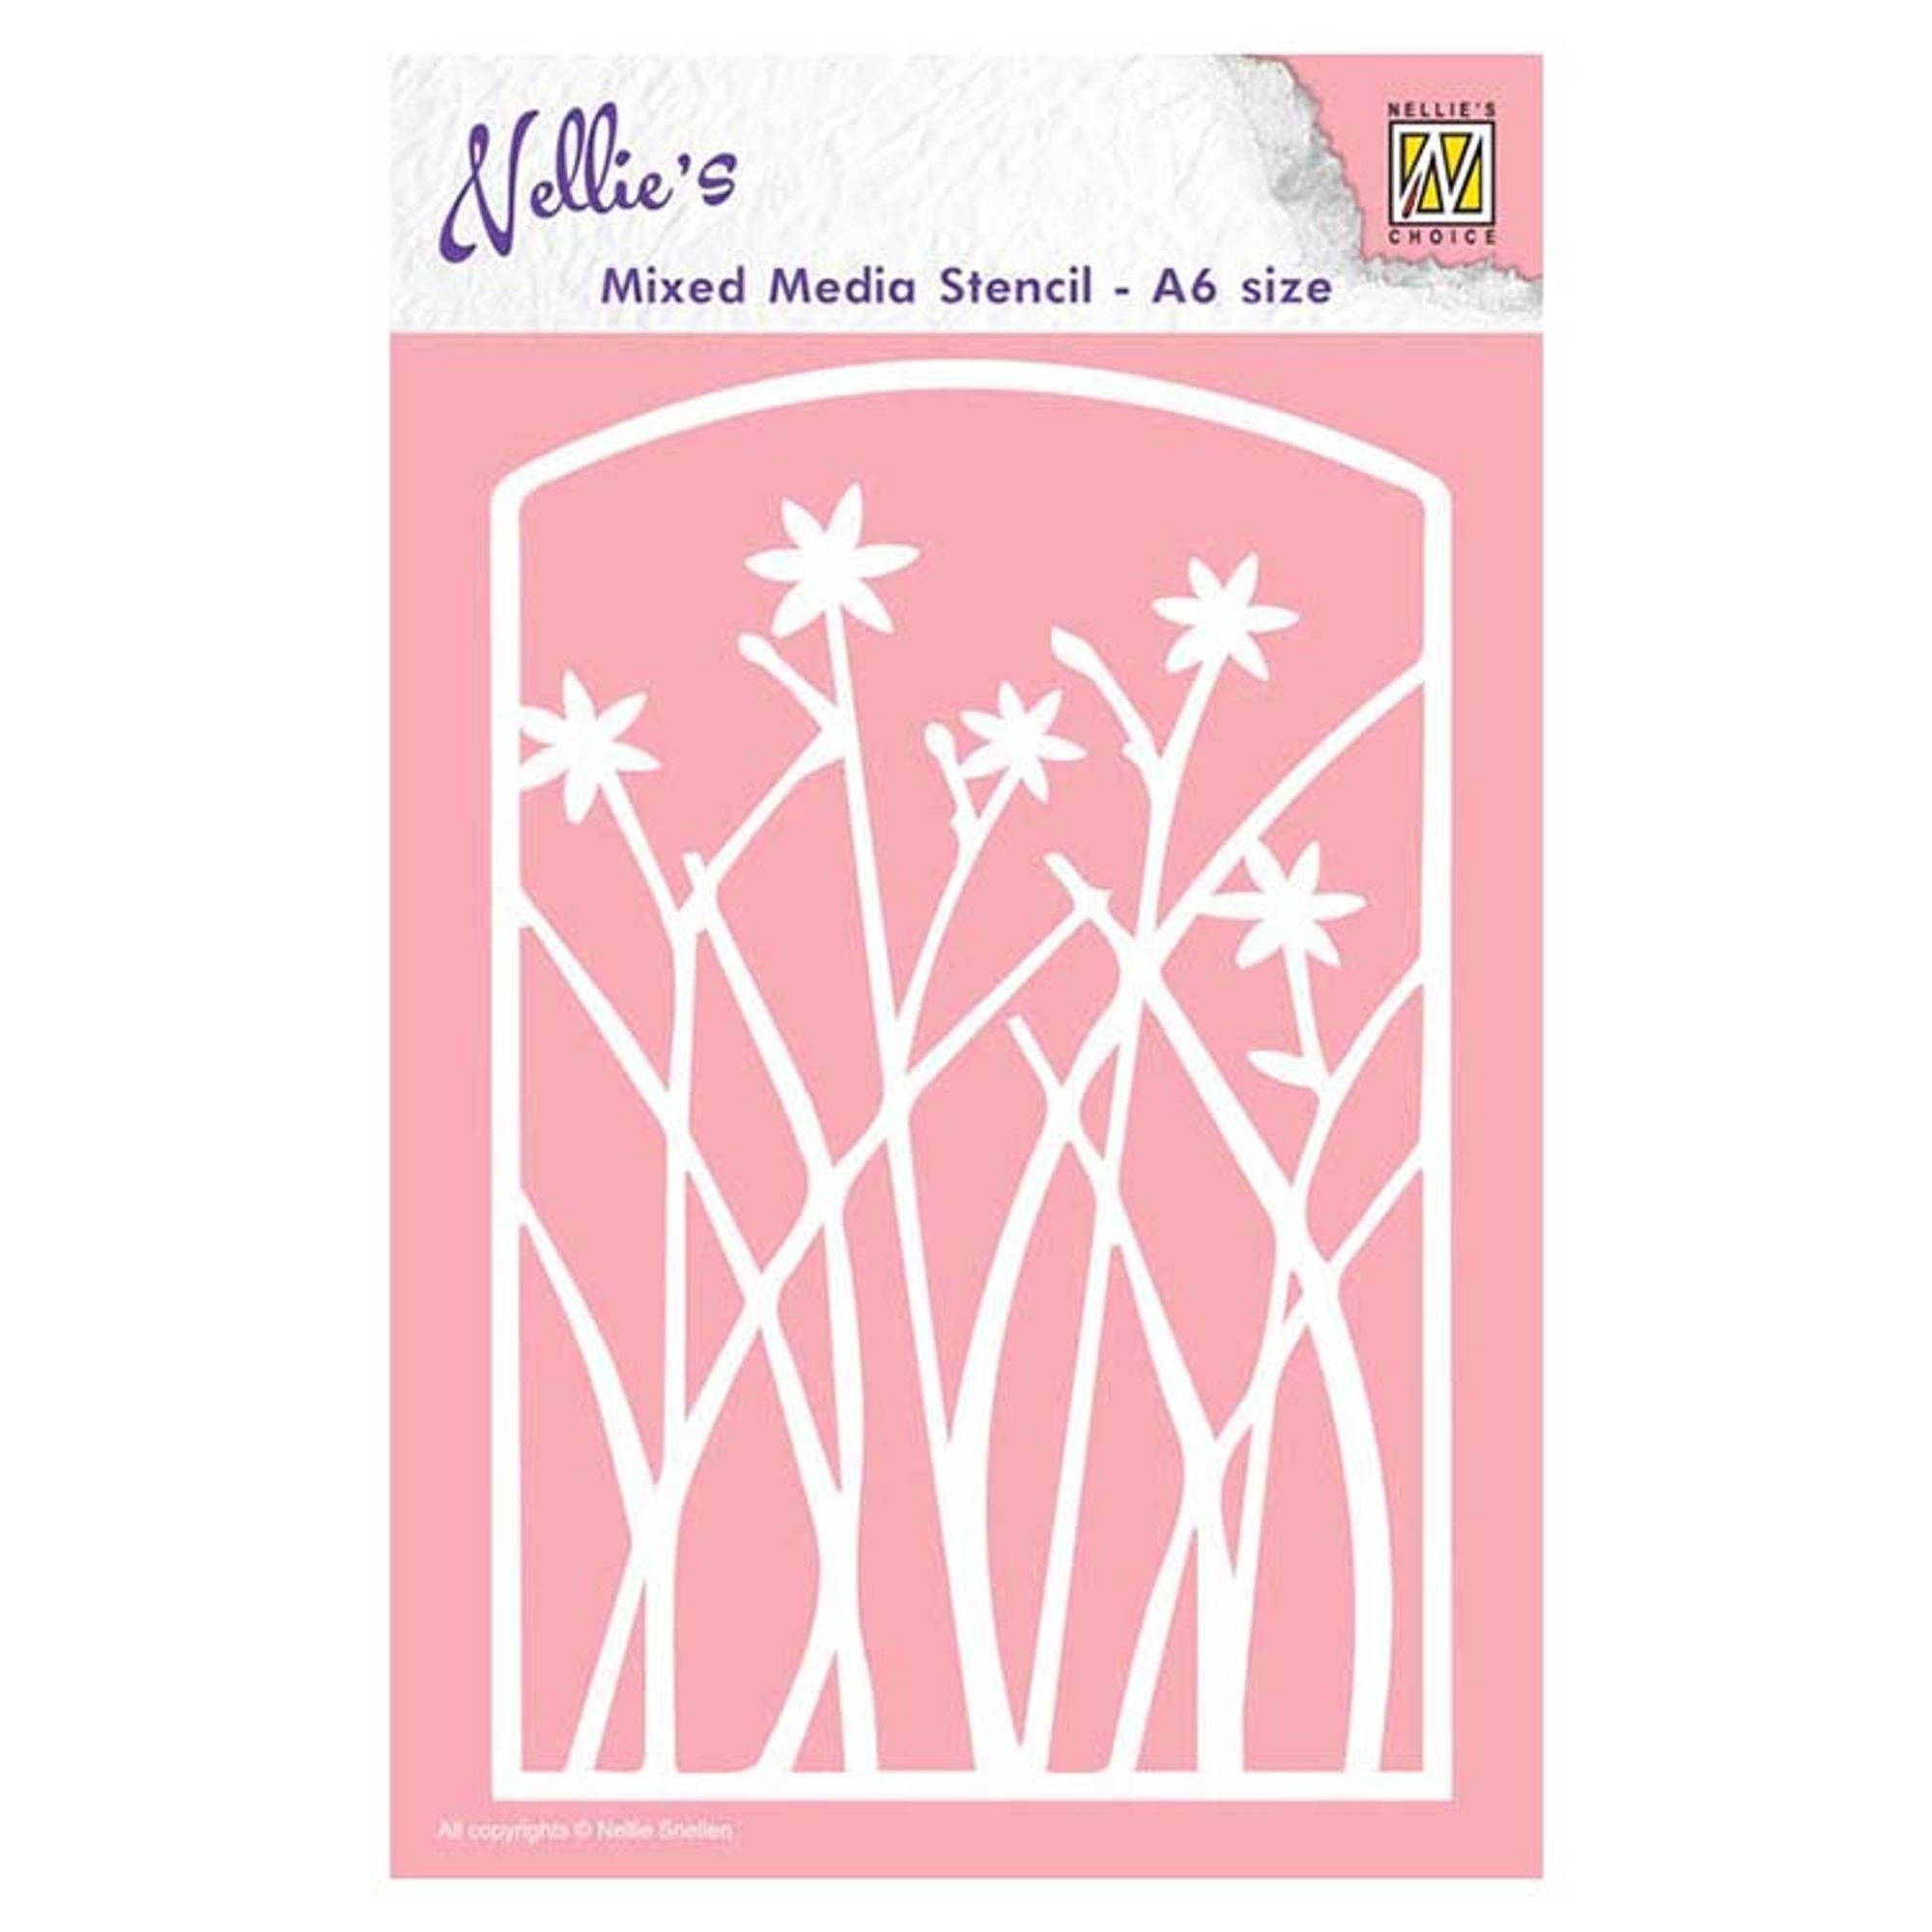 Nellie's Choice A6 Mixed Media Stencil Frame with Flowers